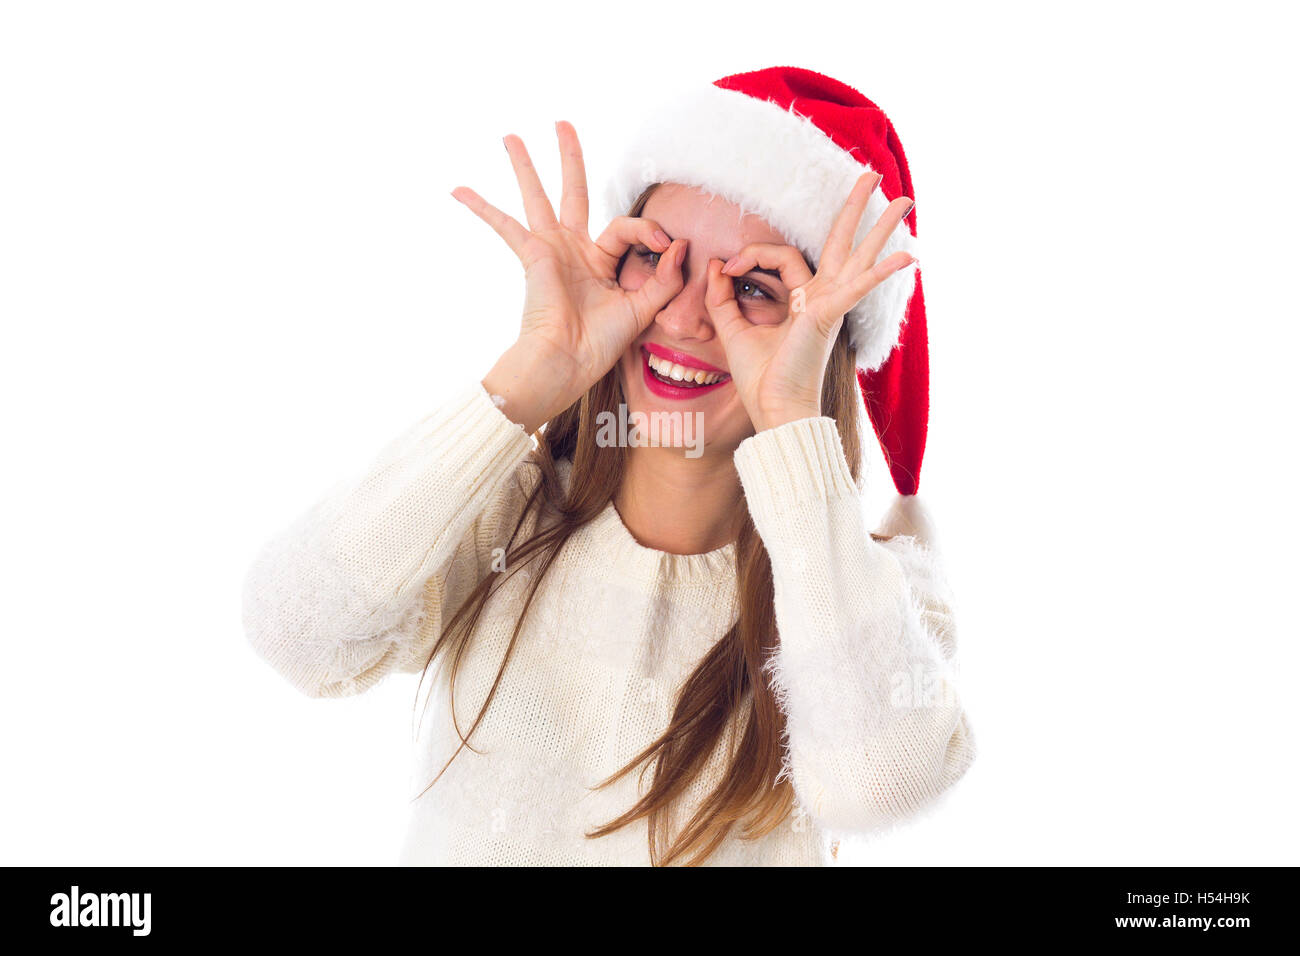 Woman in red christmas hat Banque D'Images